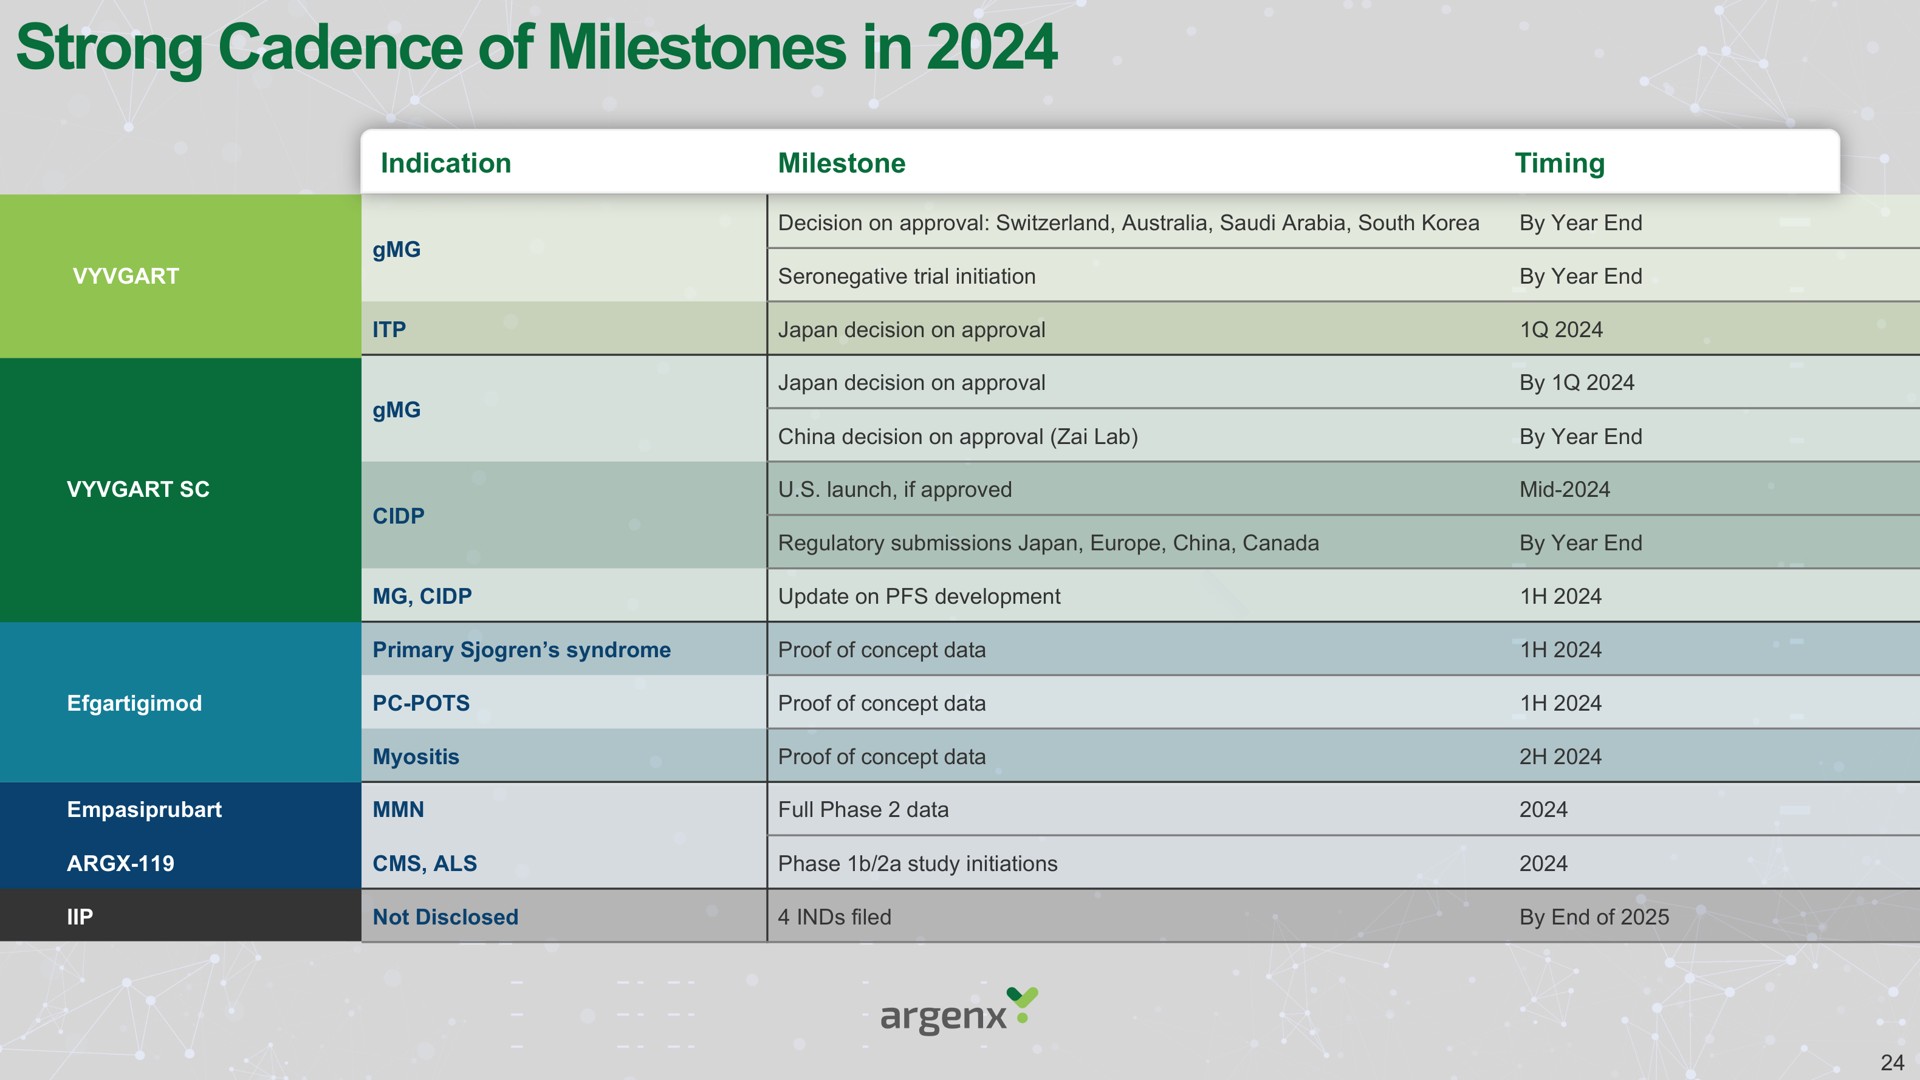 strong cadence of milestones in | argenx SE